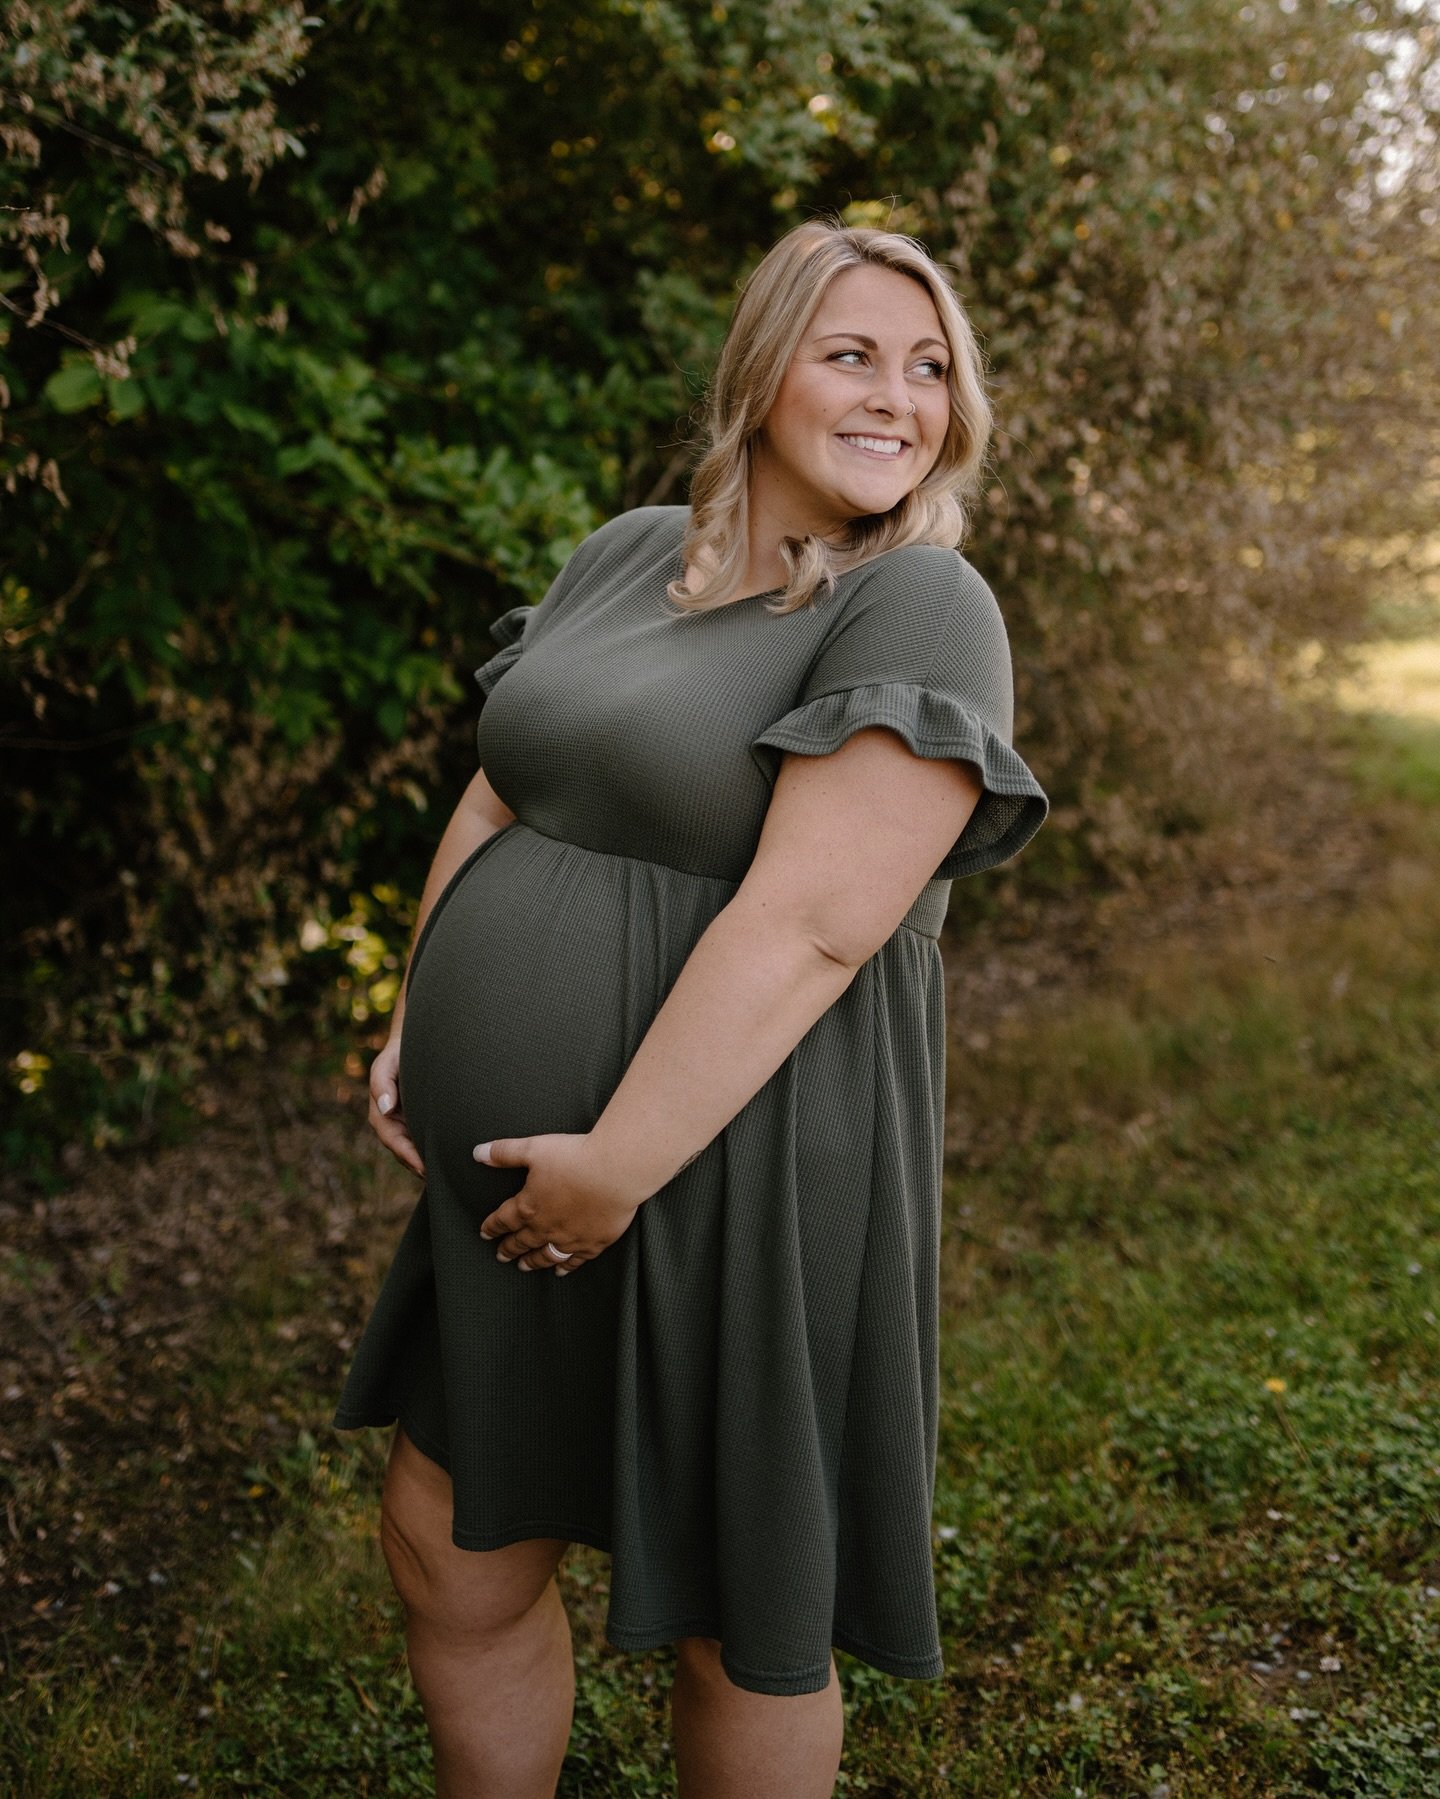 Baby boy on the way 💙

Had the most special opportunity to photograph my past wedding clients Sarah &amp; Nick for their maternity session! I was in town for a wedding and it just worked out so perfectly that we could connect again! Love these two f